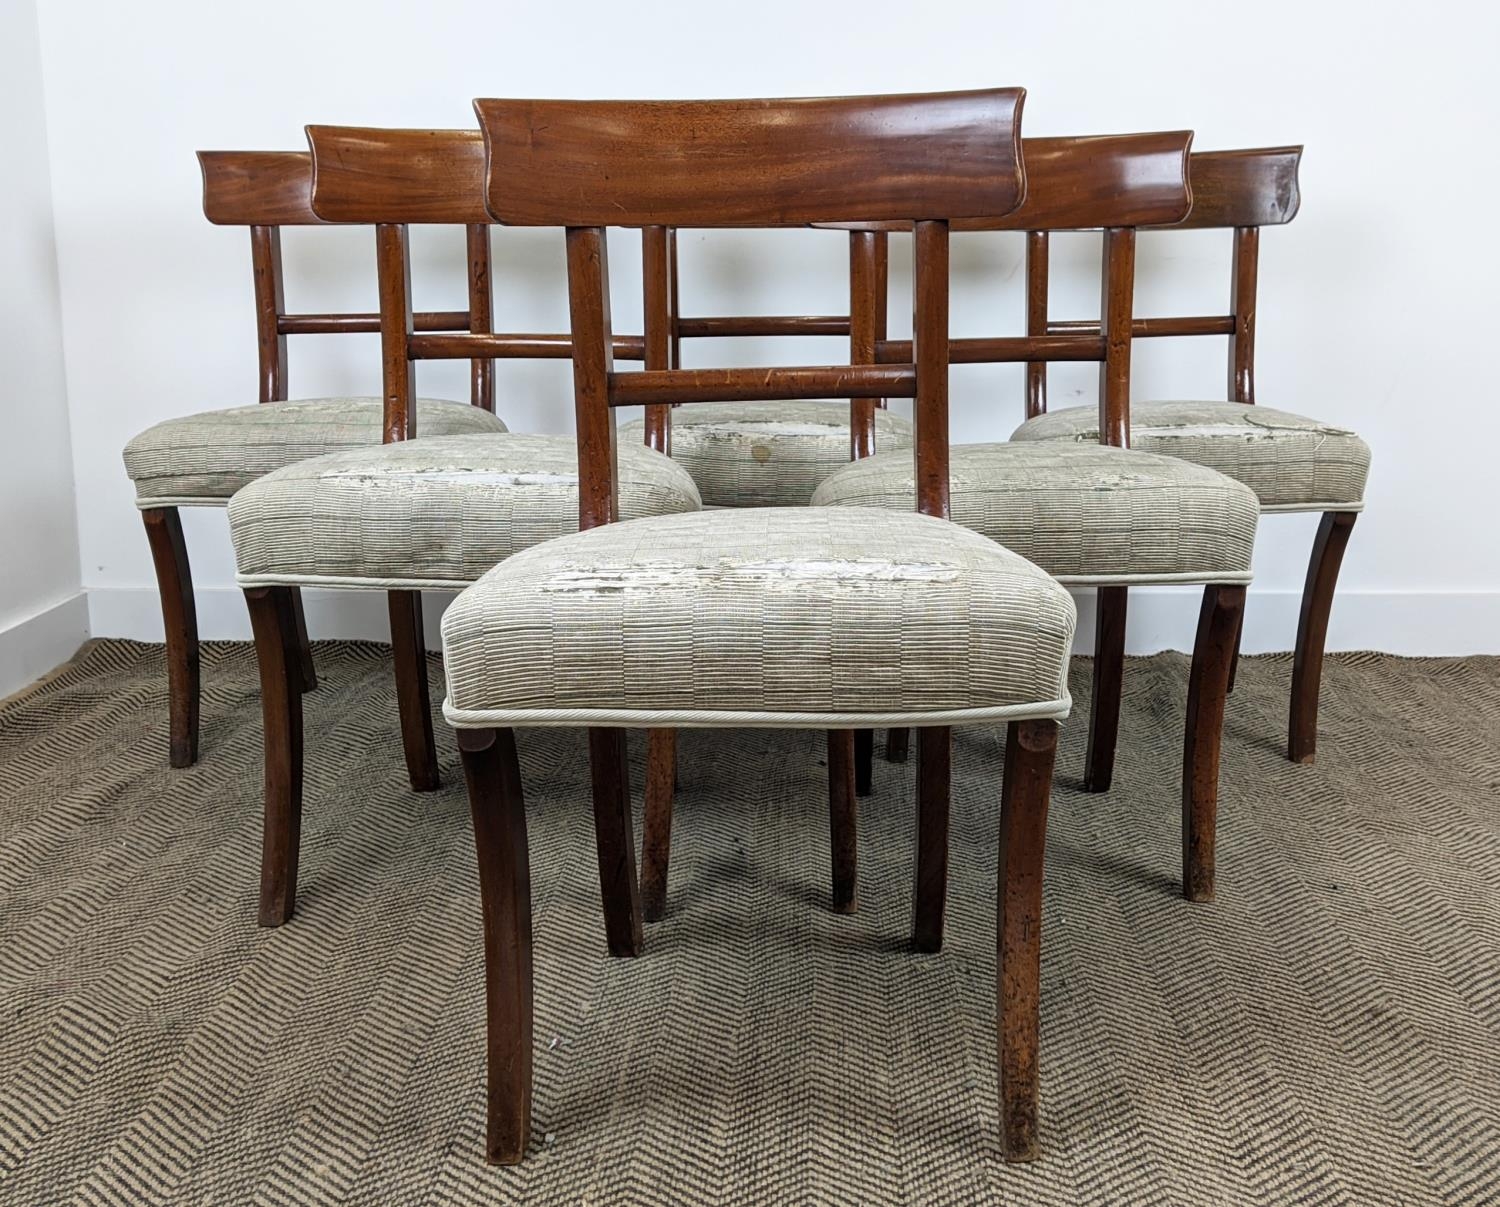 DINING CHAIRS, a set of six, circa 1830, mahogany with stuffover seats, 86cm H x 49cm x 48cm. (6) - Image 6 of 16